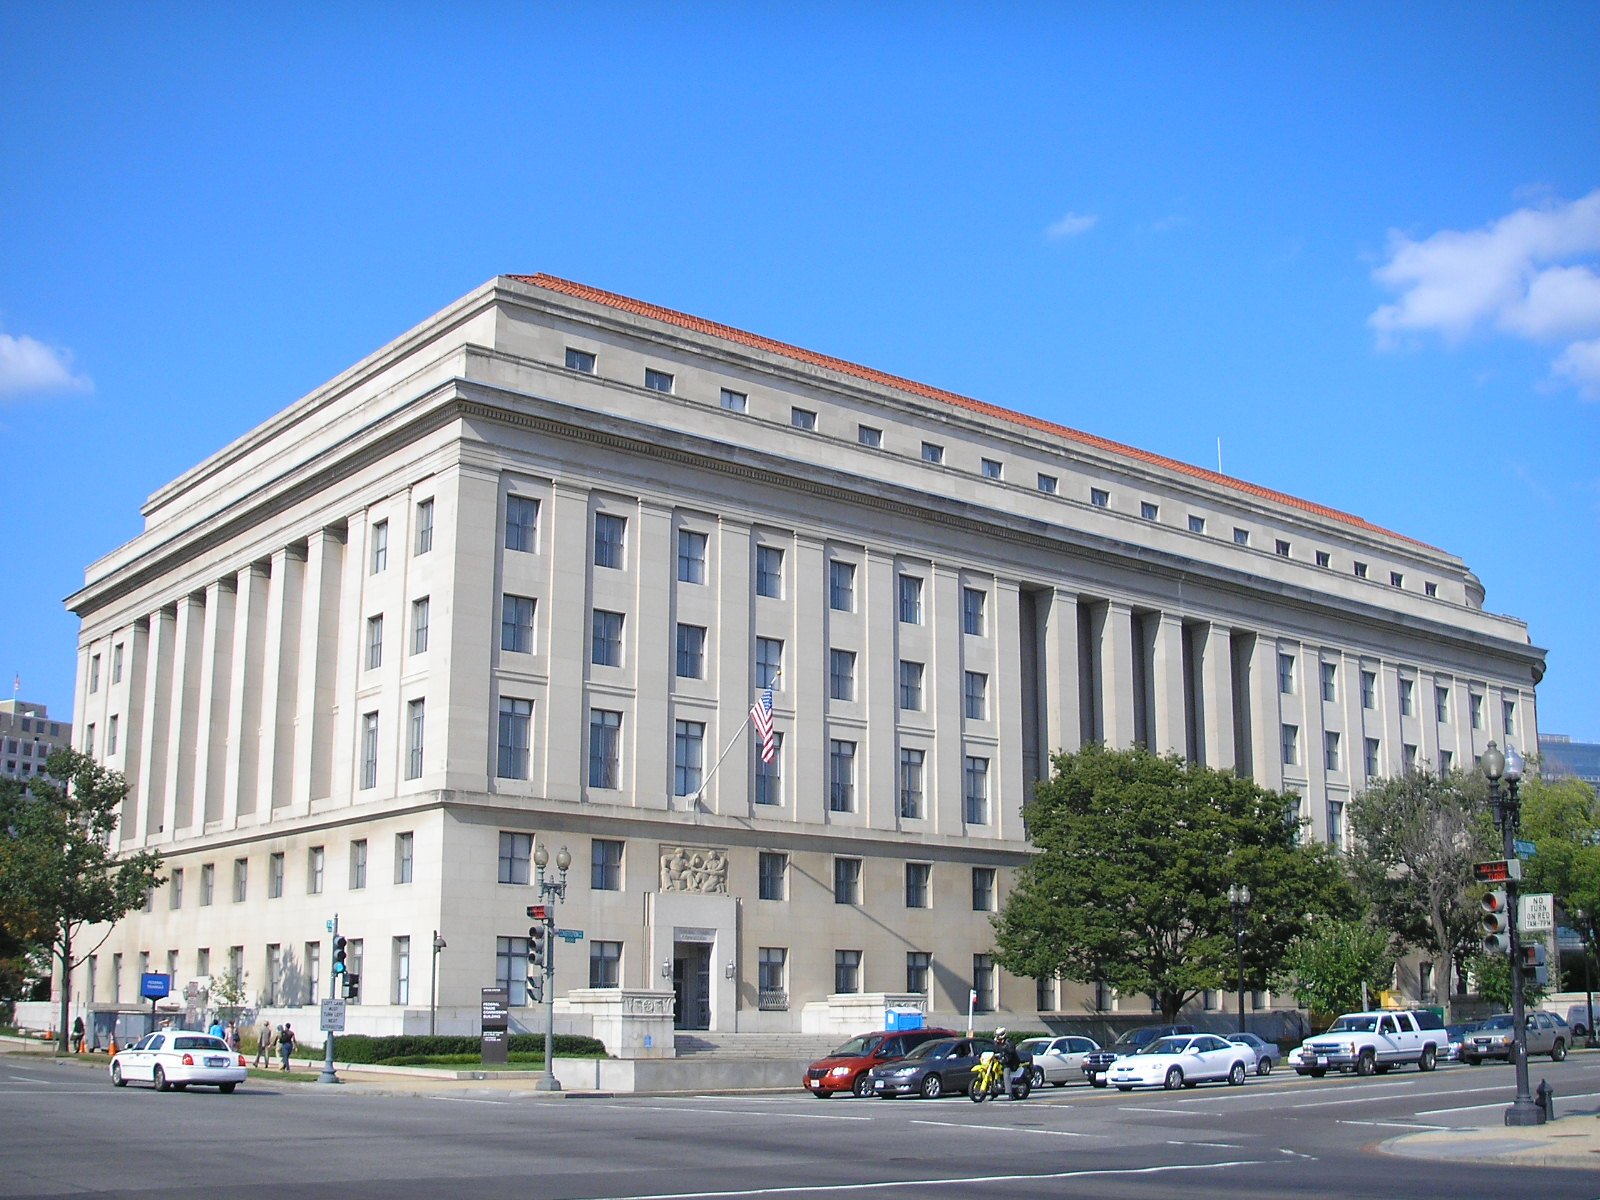 The Federal Trade Commission in Washington DC